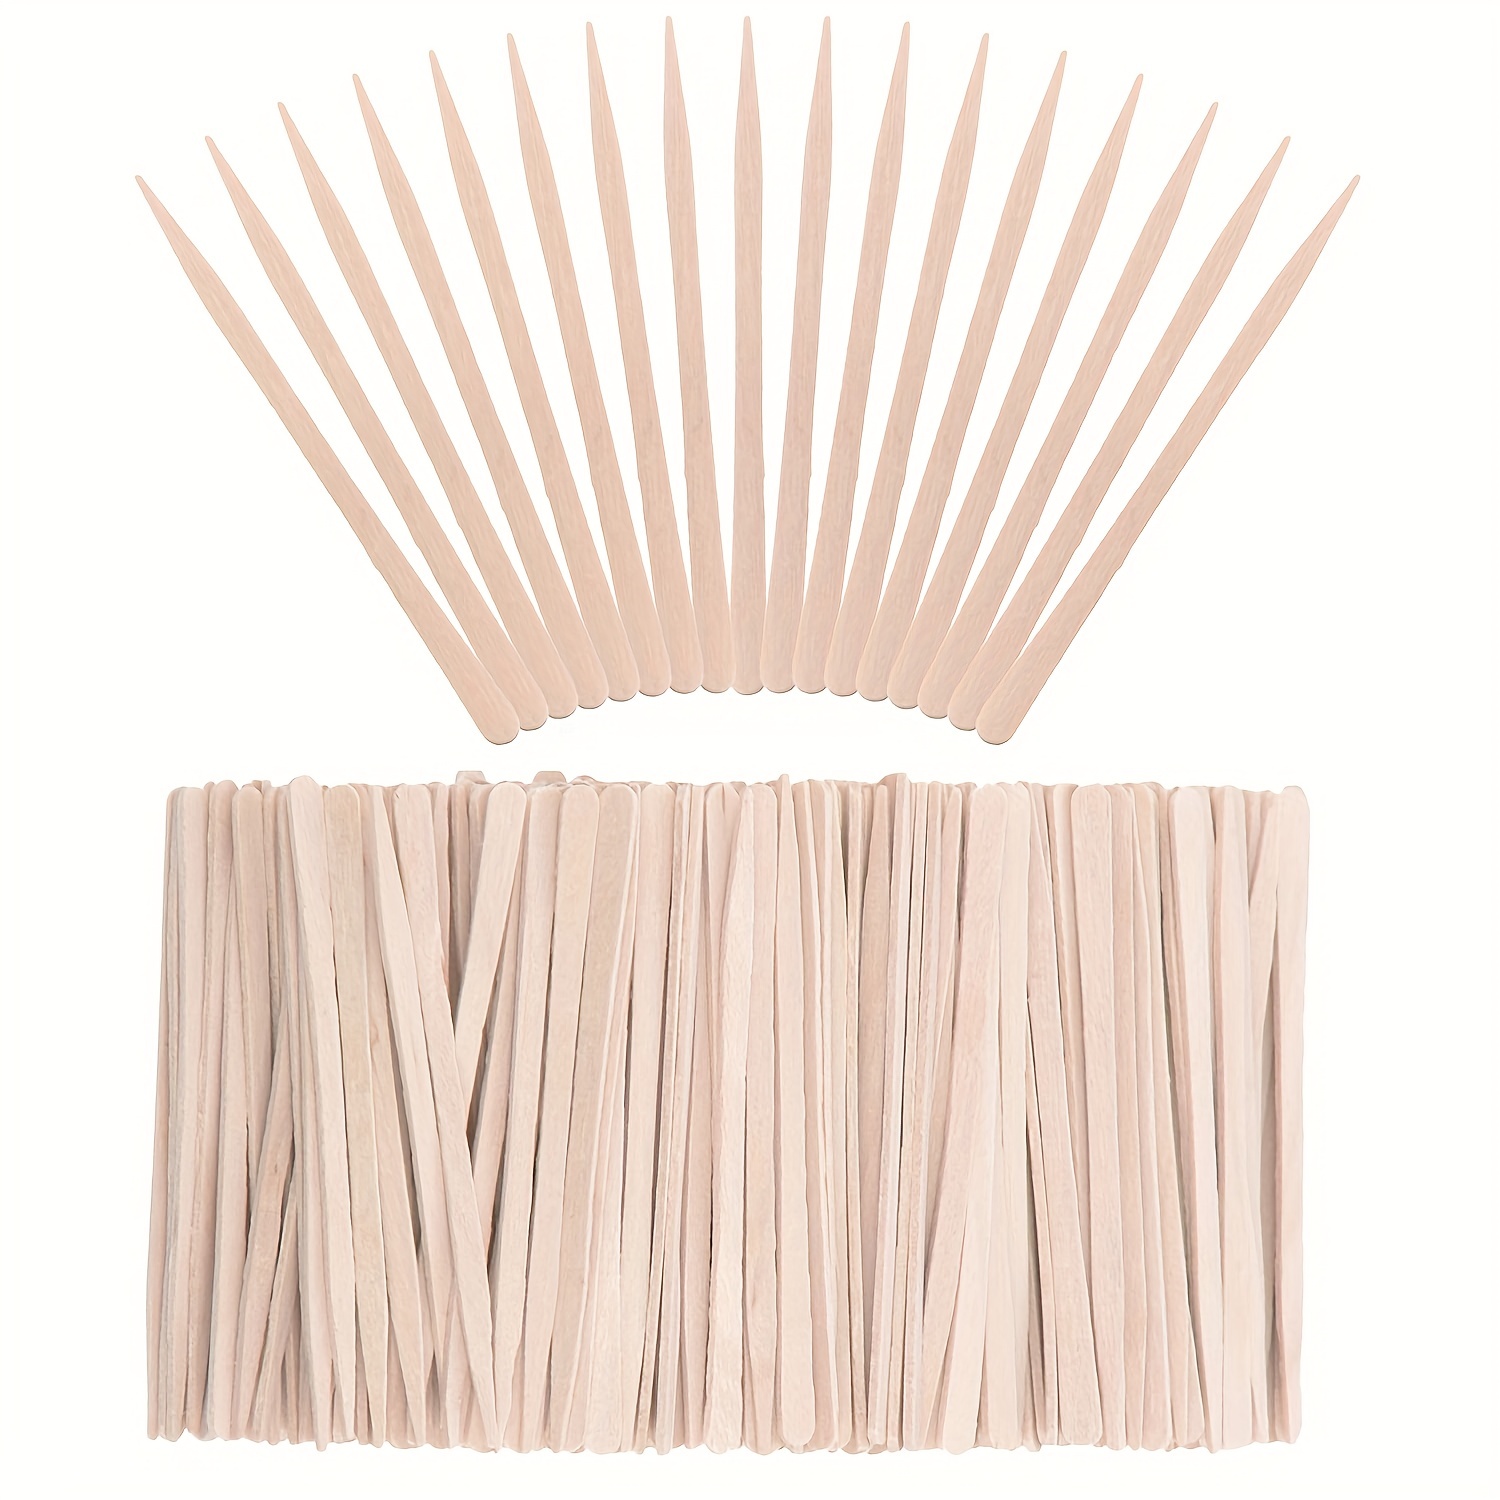 DecBlue Wooden Wax Sticks 500 Pcs Wood Hair Removal Waxing Spatulas  Applicators S M L Sizes for Body Legs Facial or Wood craft S